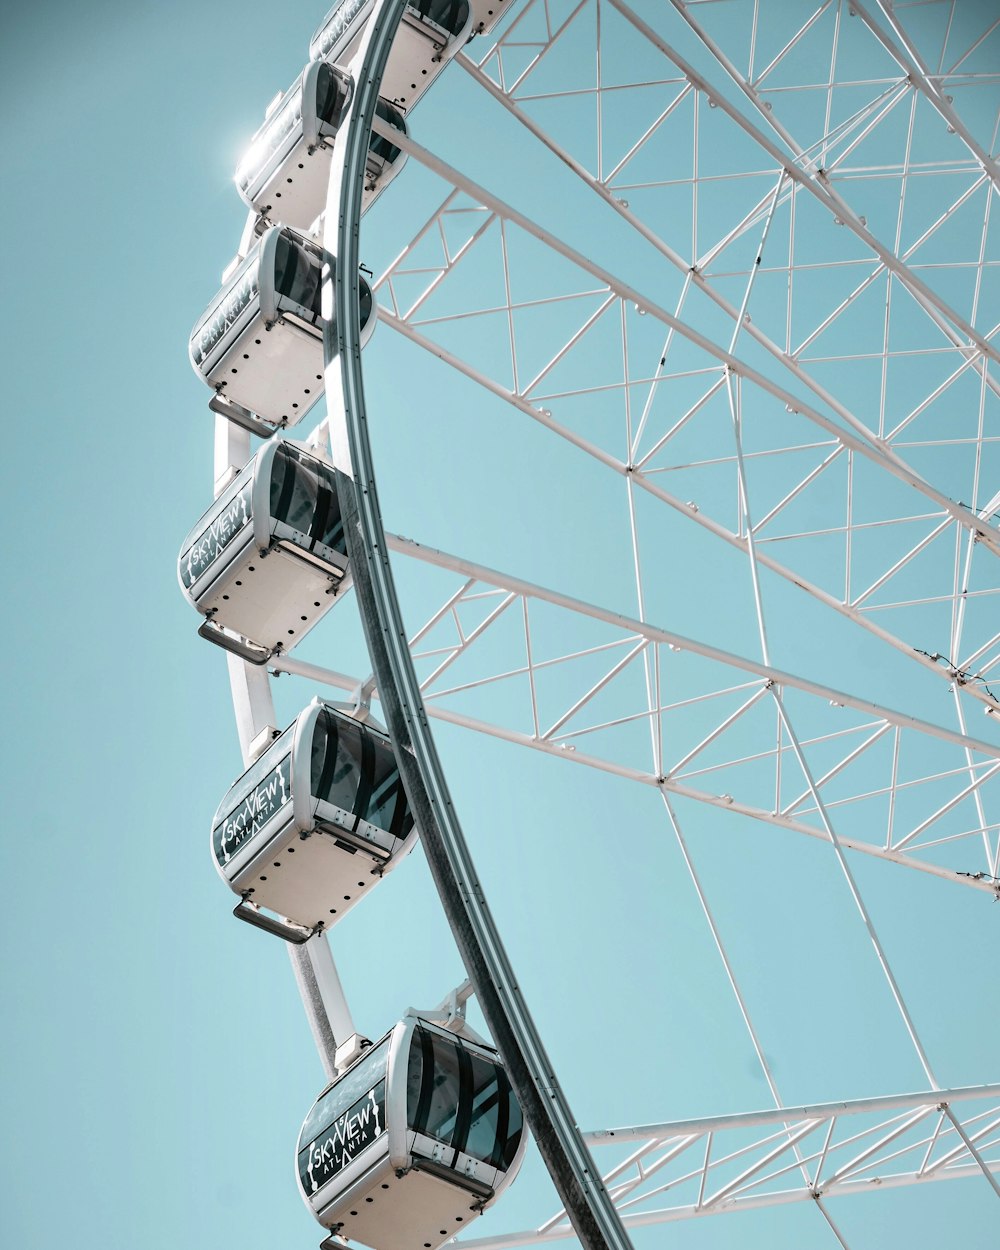 white and grey ferris wheel under clear blue sky